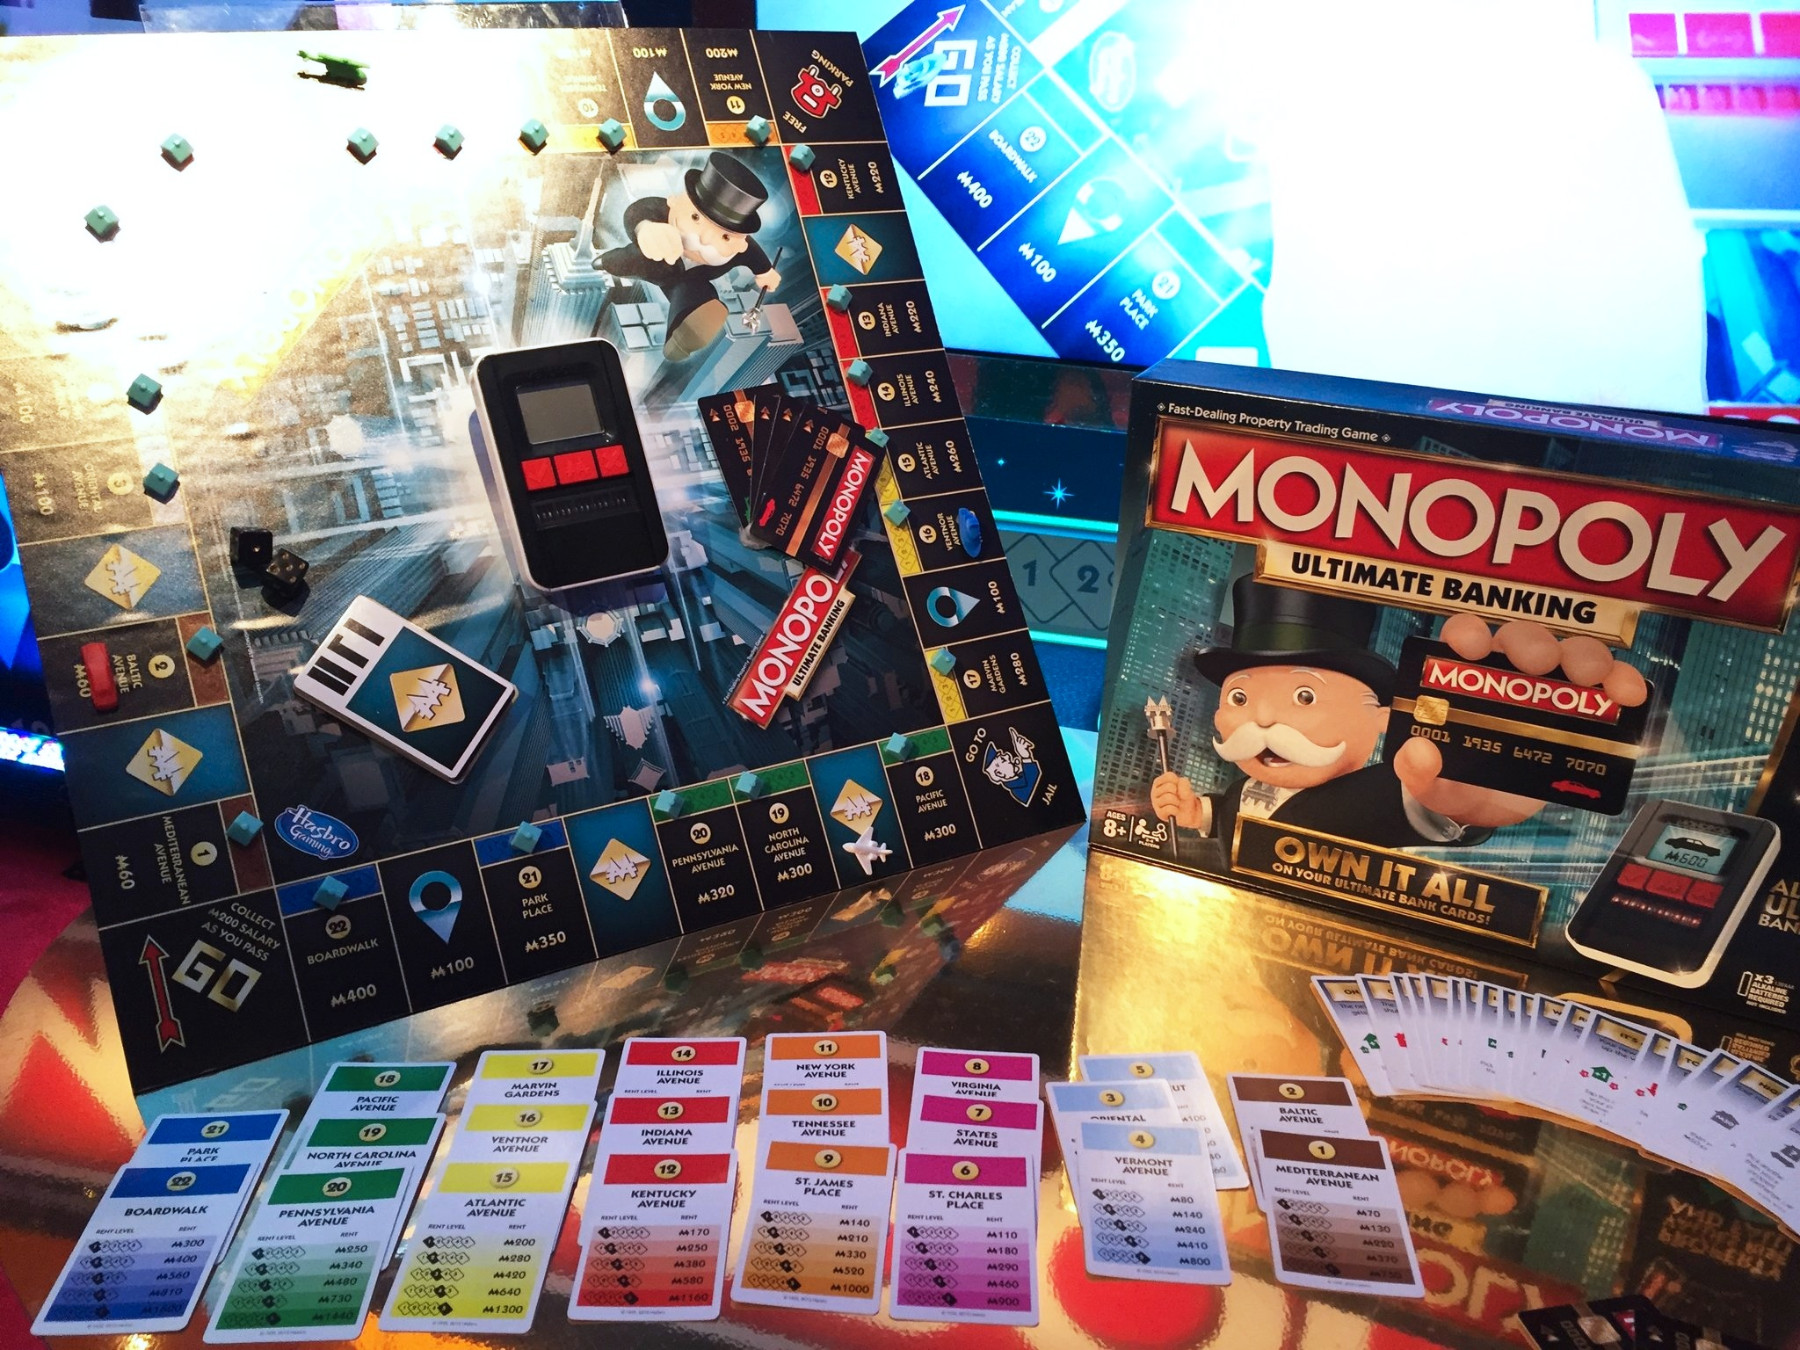 Monopoly Ultimate Banking.